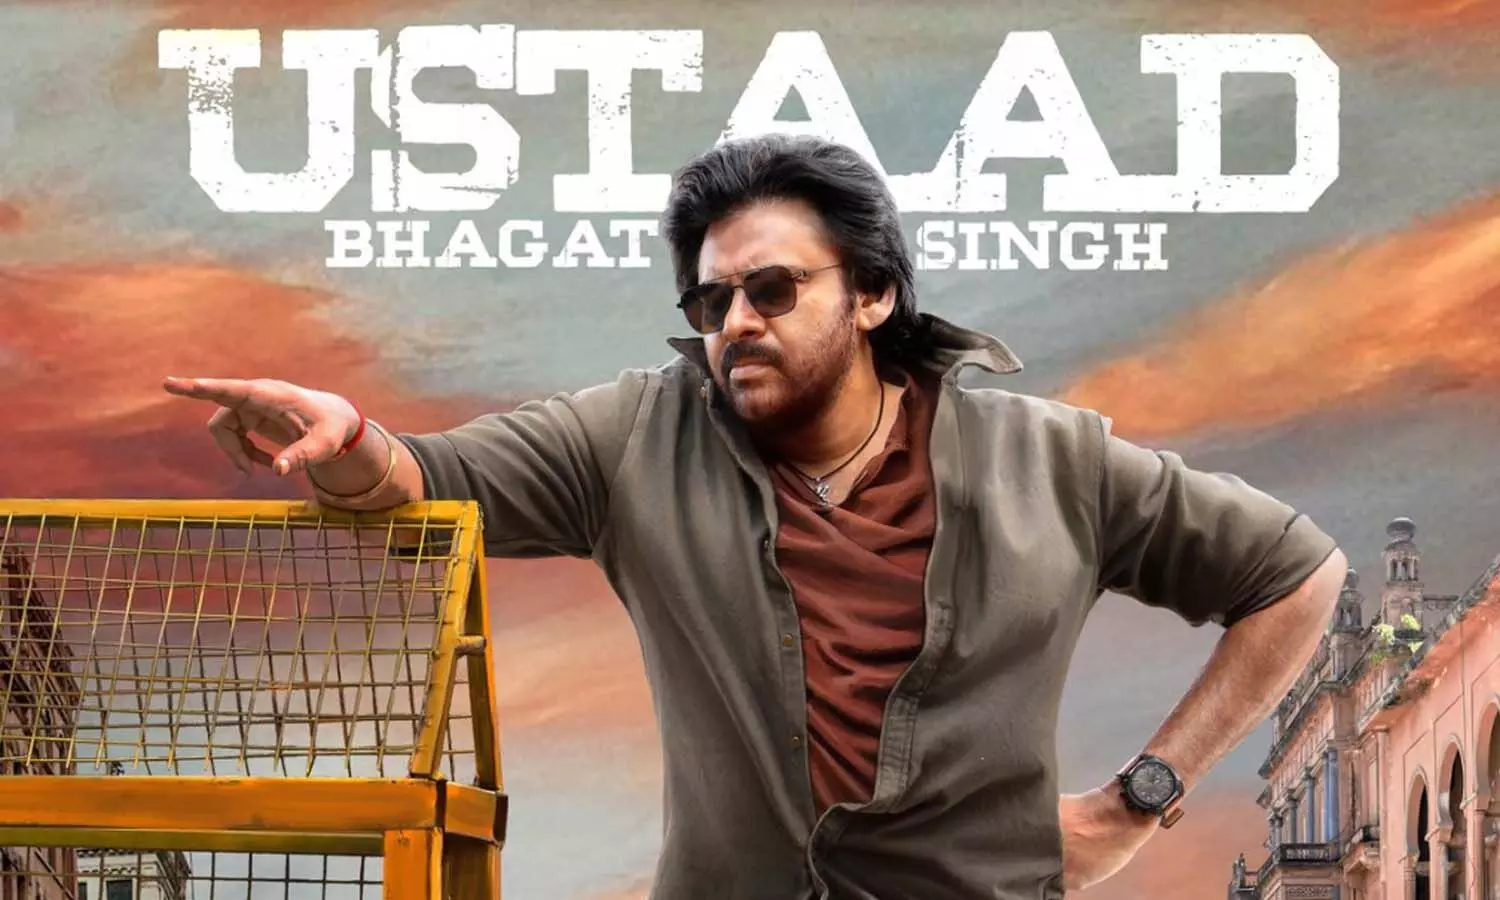 Producer gives a massive update on the release date of Ustaad Bhagat Singh